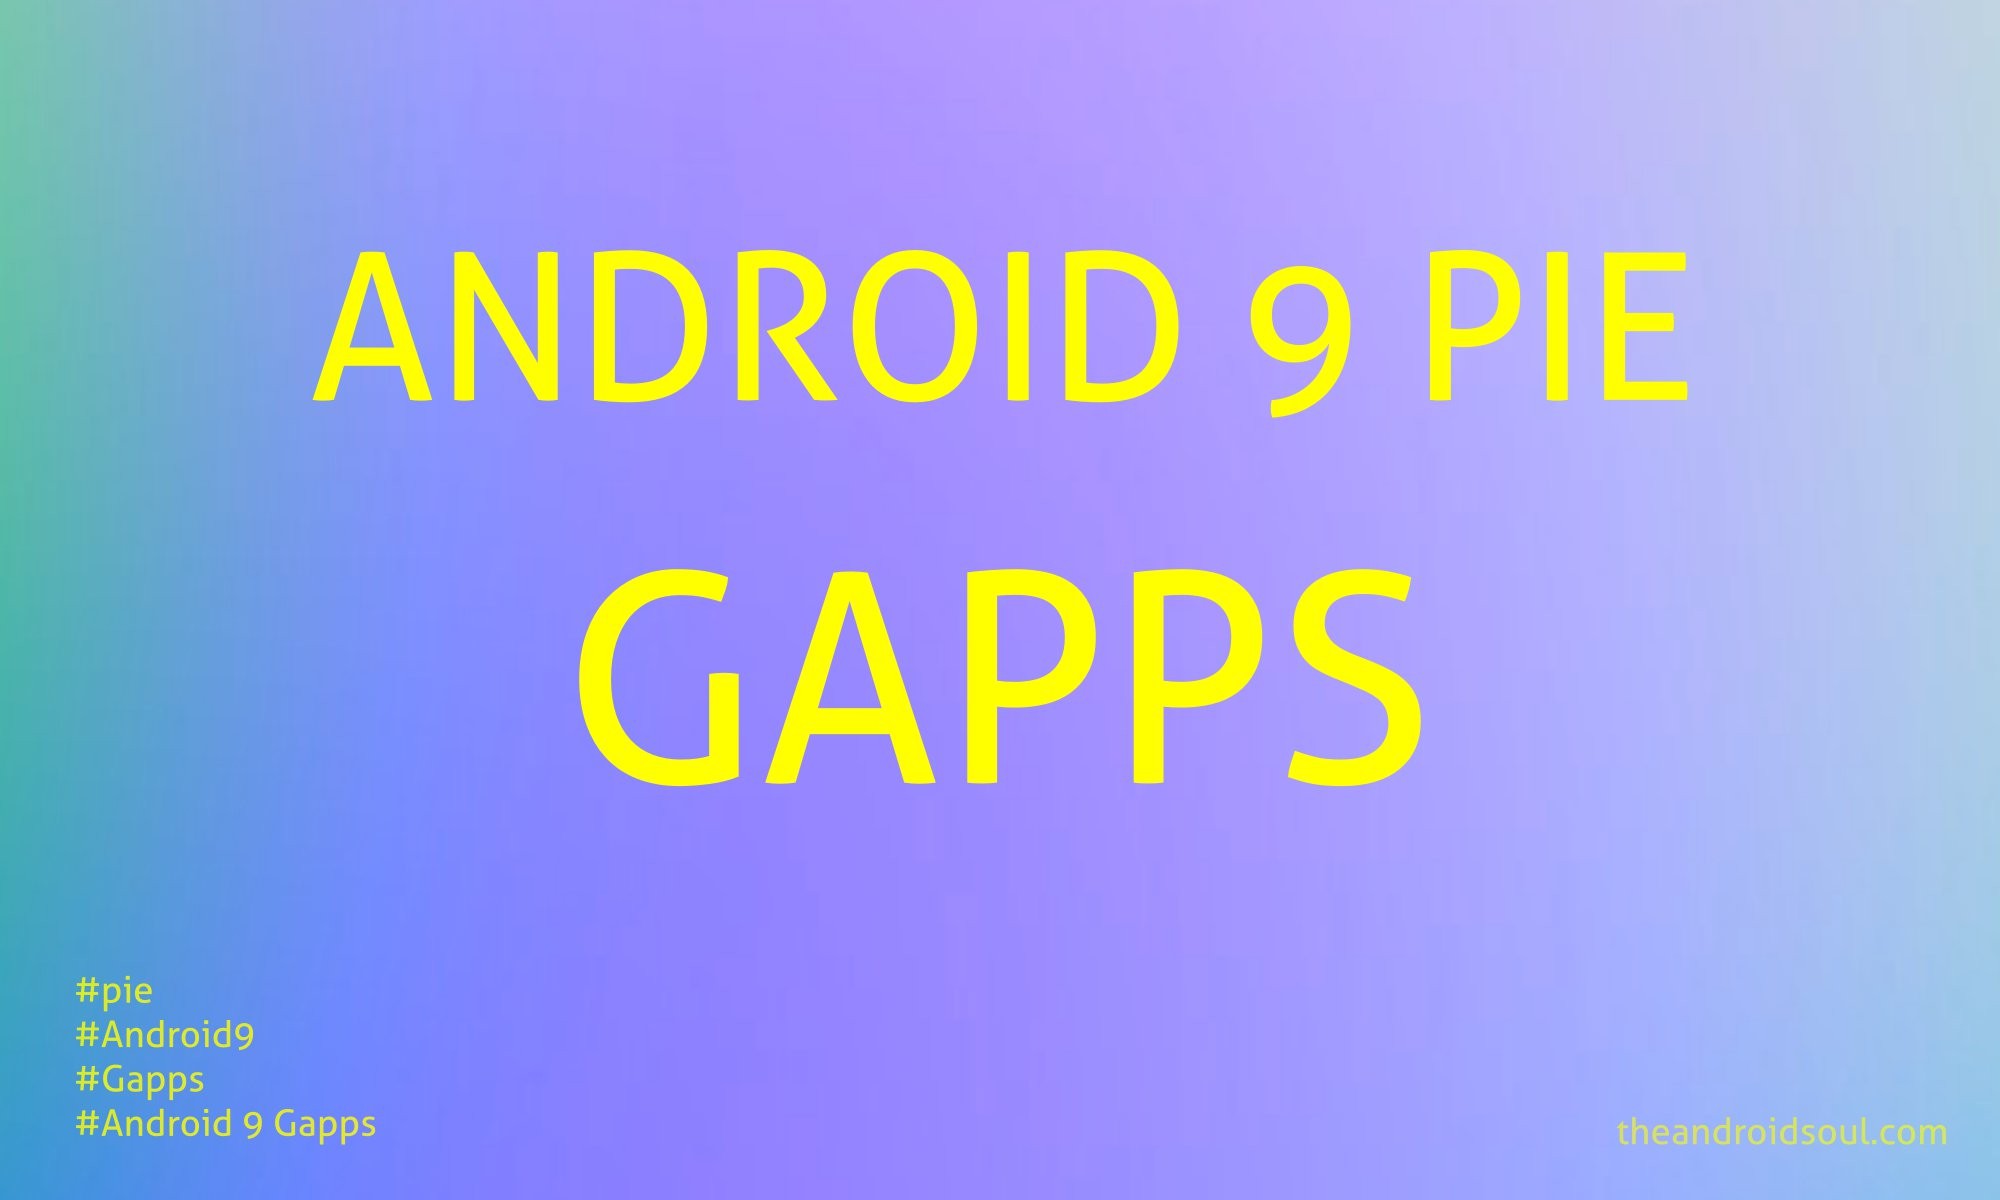 android 9 pie gapps